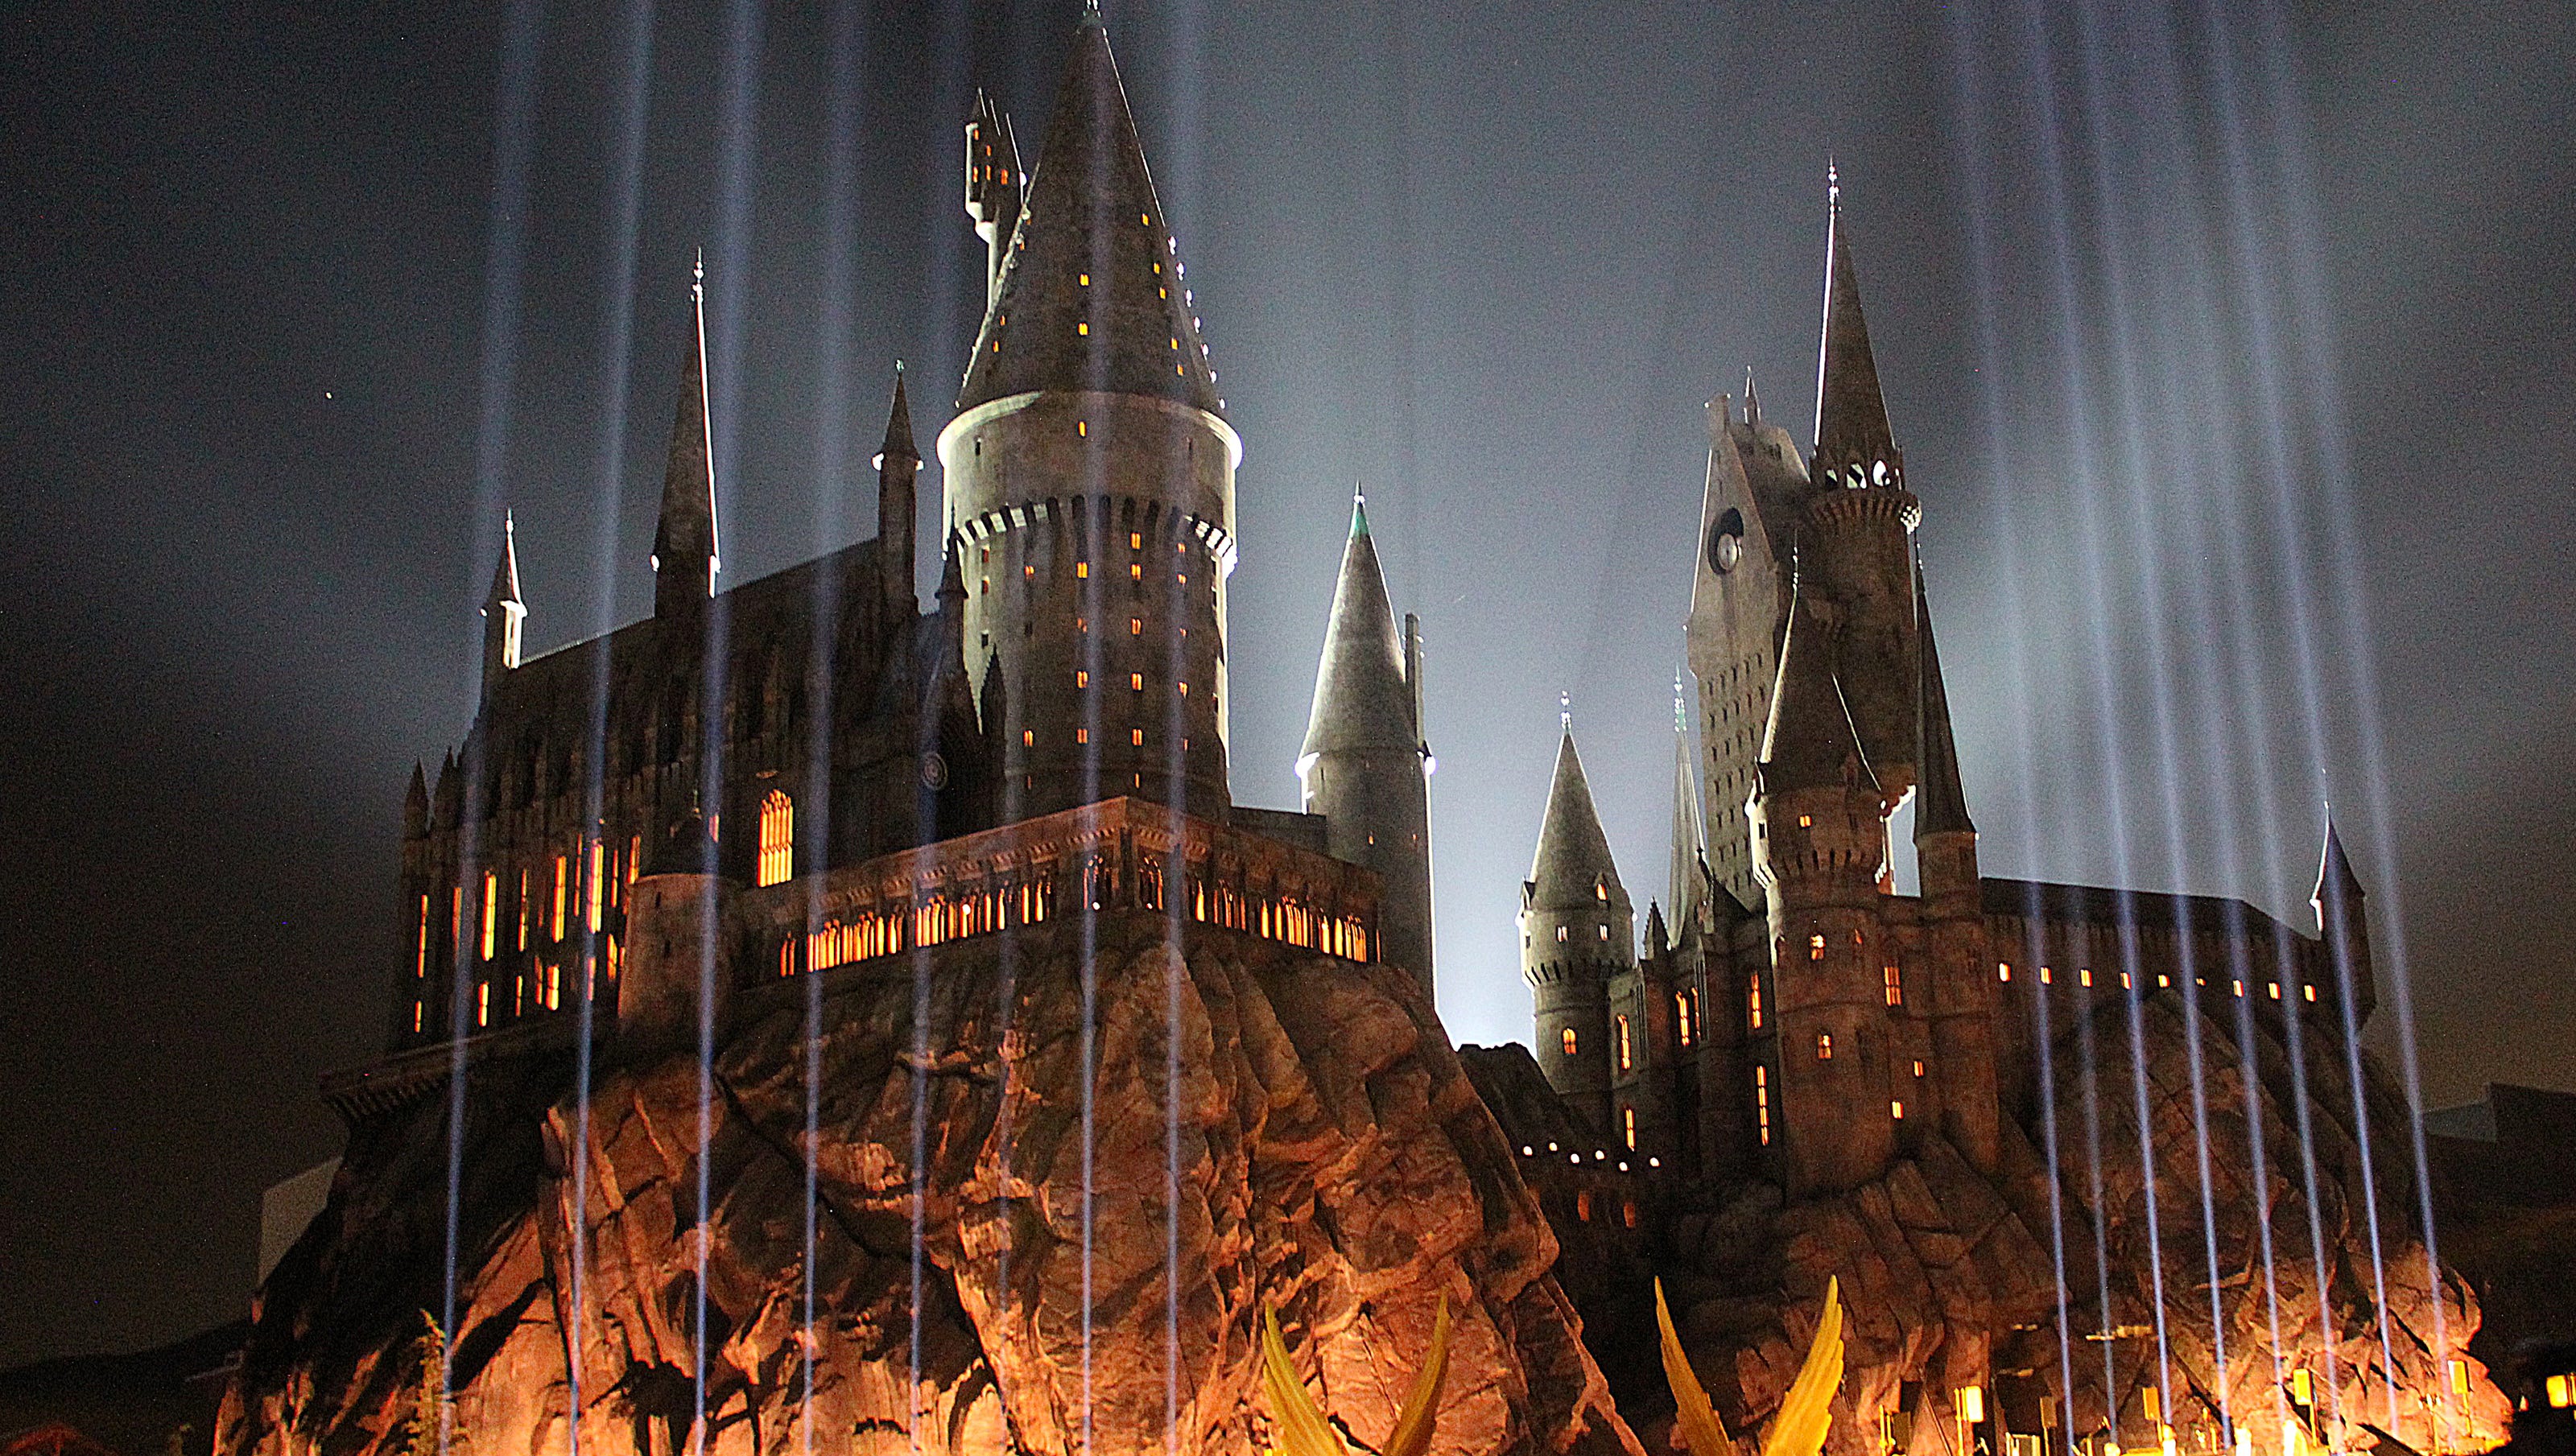 Iluminar estudiar imperdonable Wizarding World of Harry Potter: What's different in Hollywood?